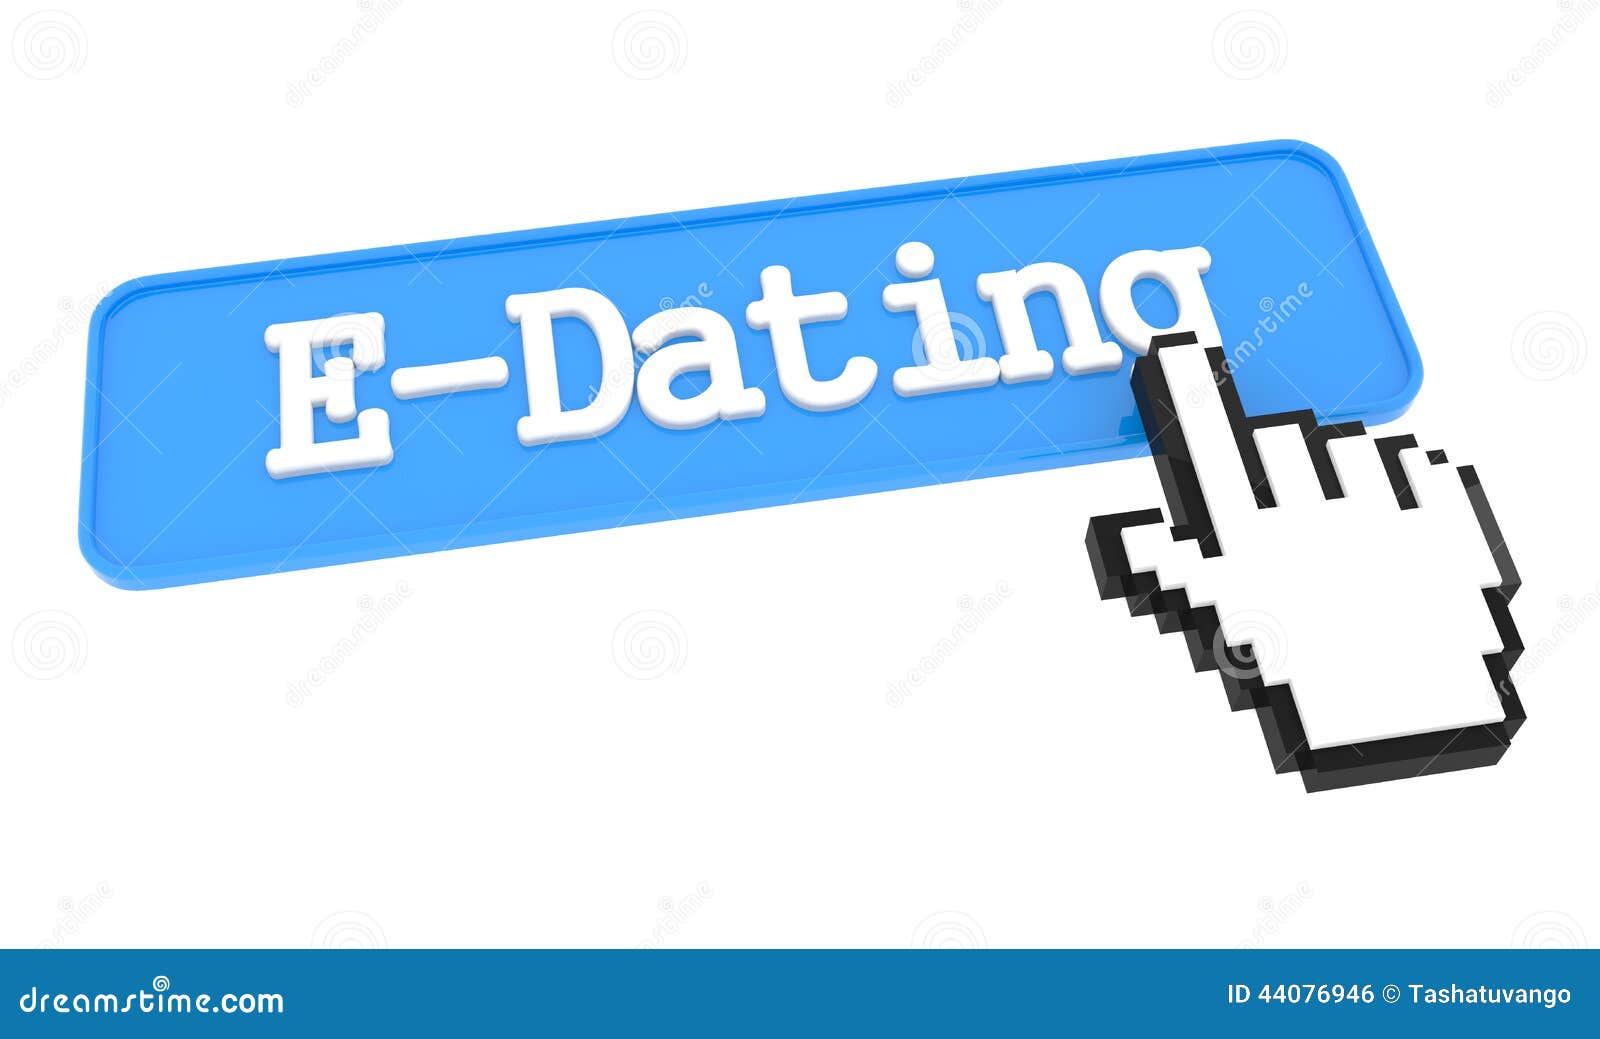 ee dating)